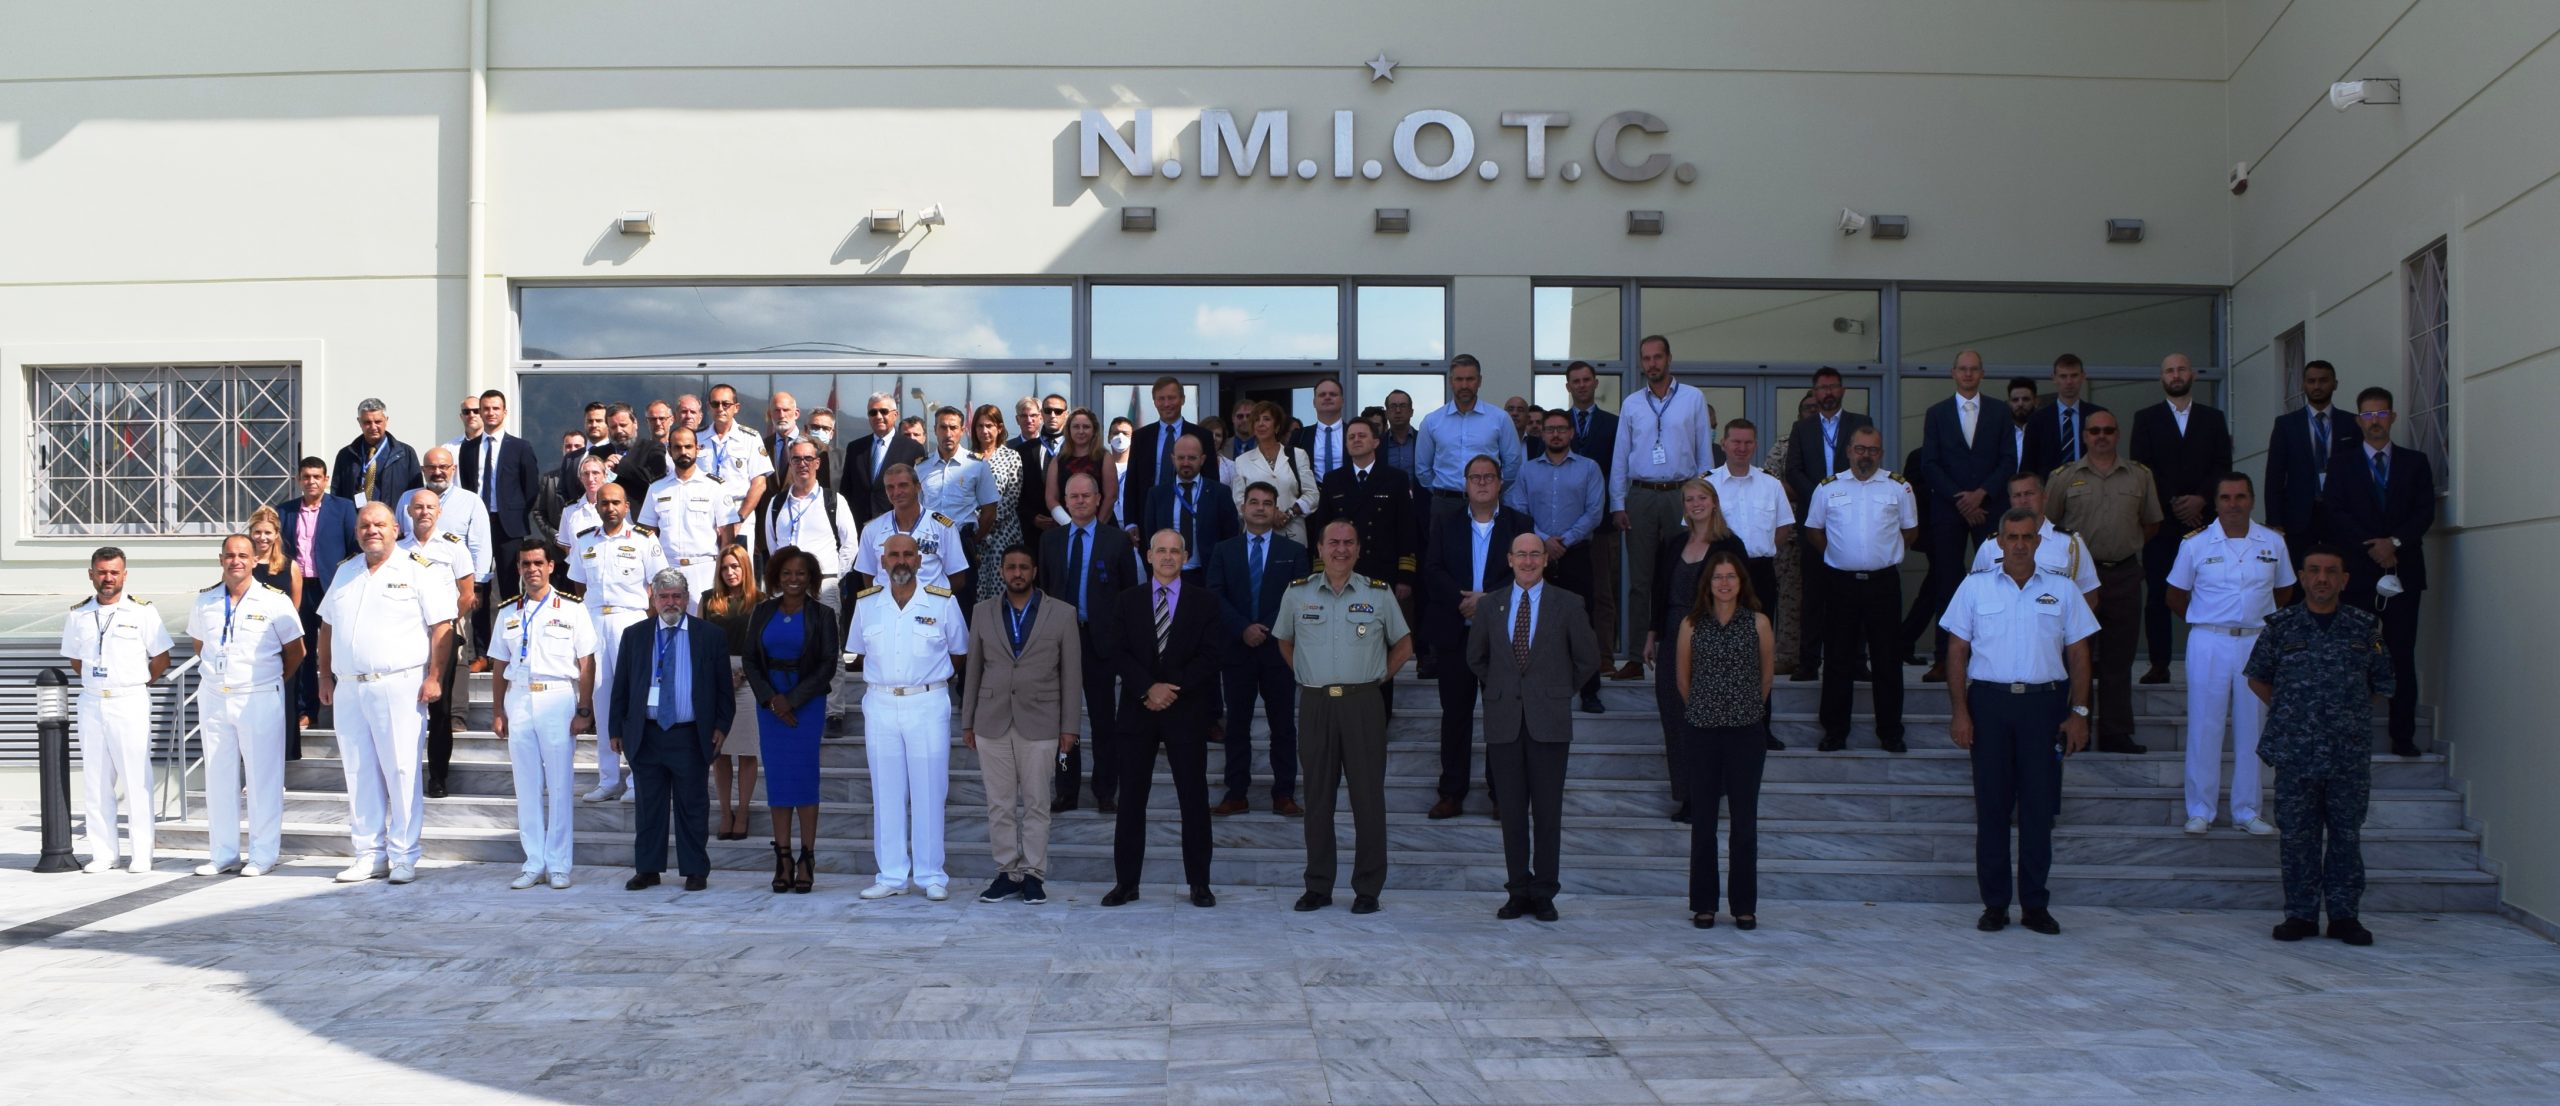 CYRENE showcased in the 5th NMIOTC Cyber Security Conference In the Maritime Domain